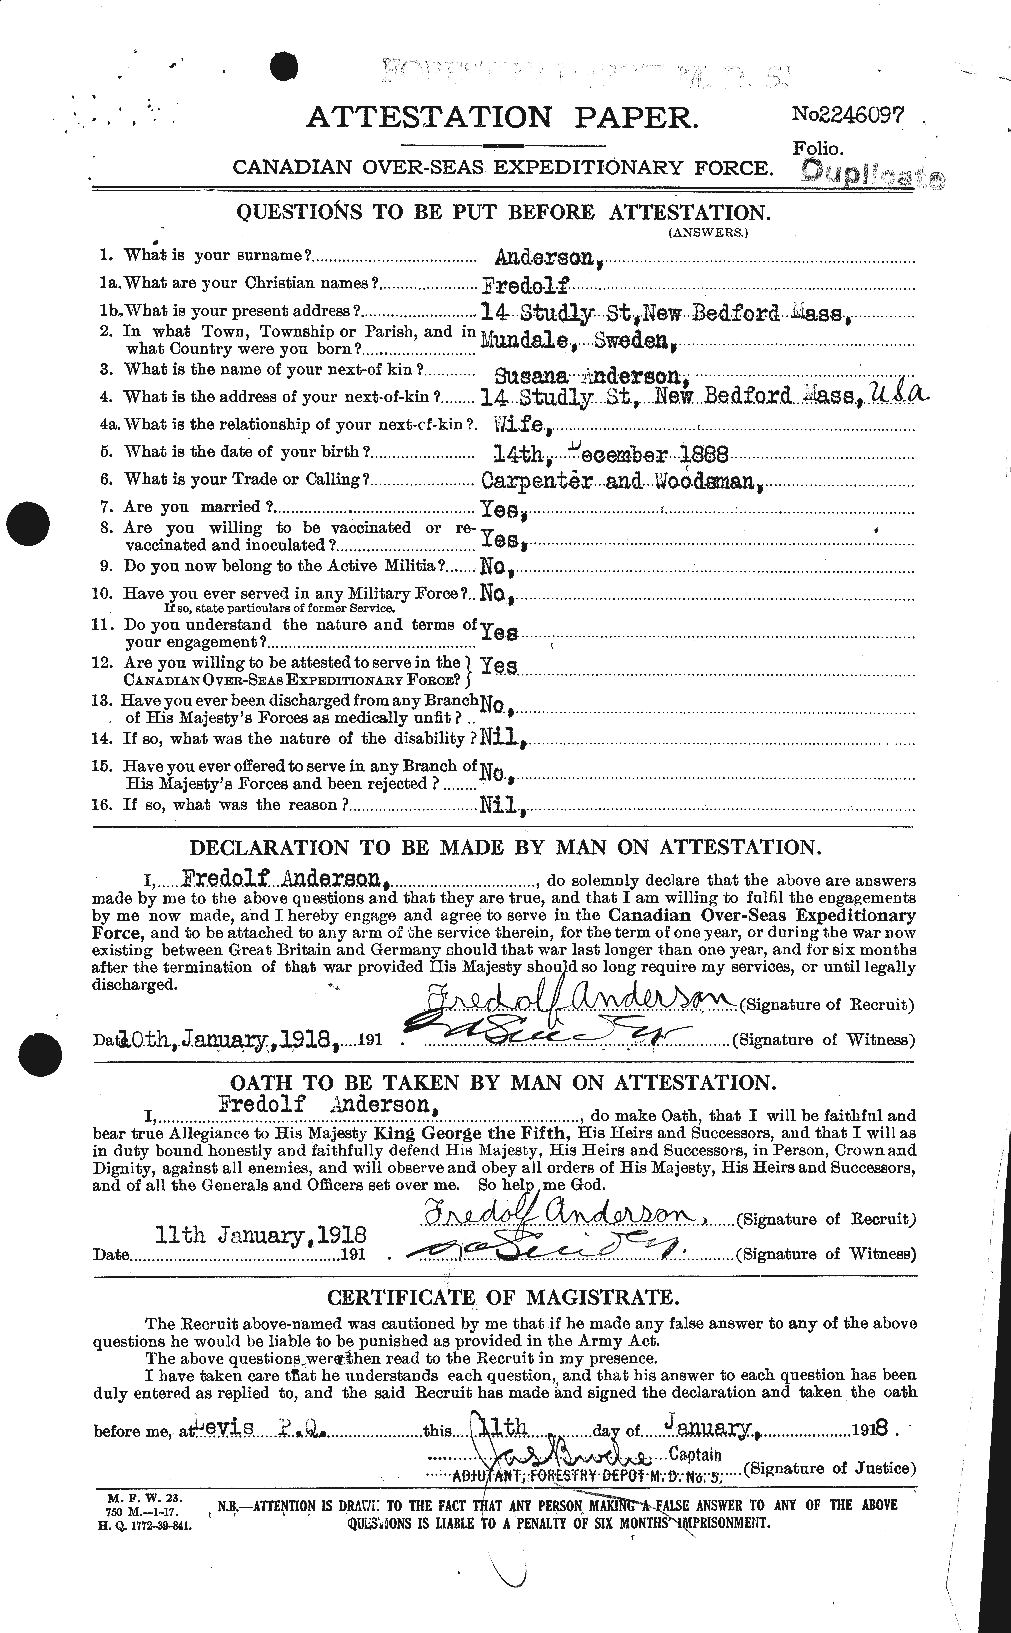 Personnel Records of the First World War - CEF 209799a